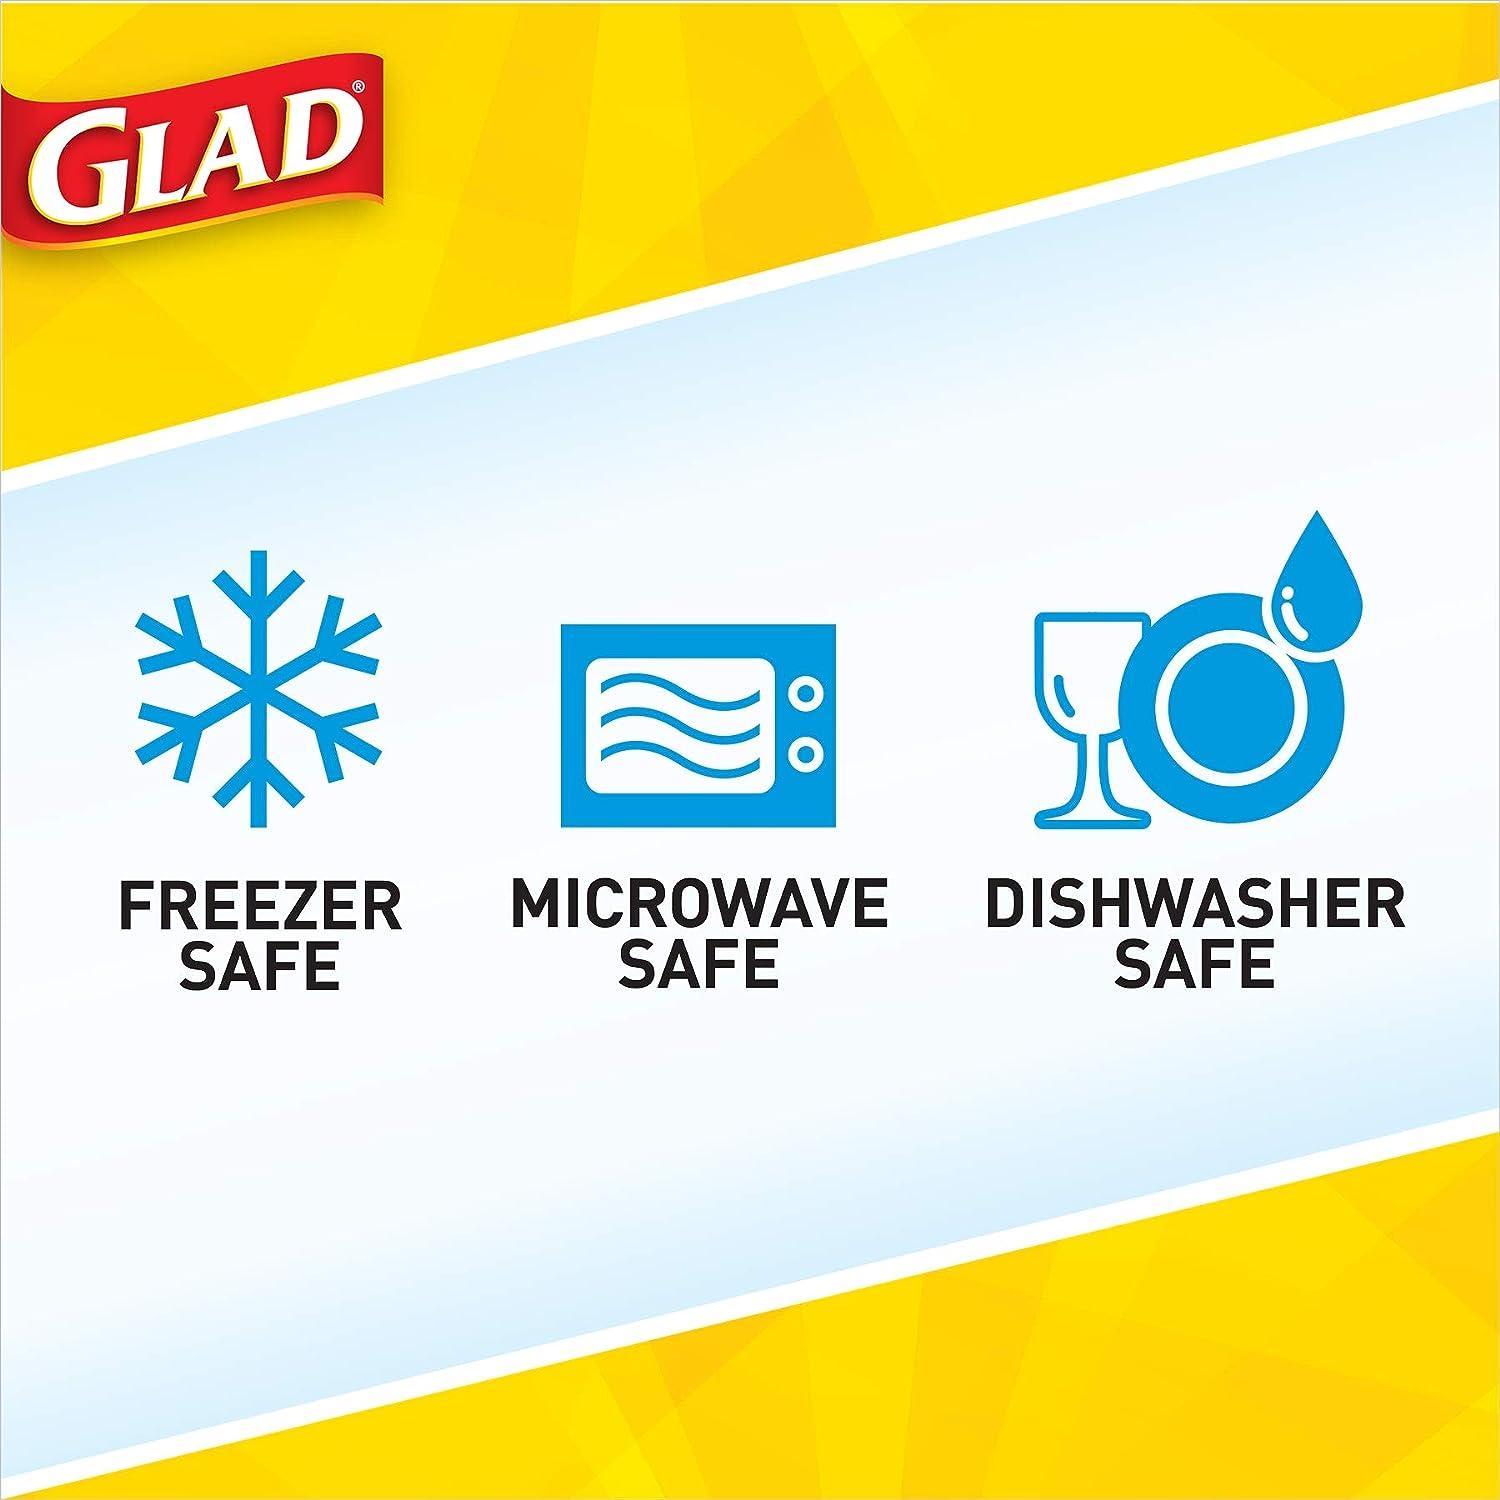 GladWare Design Series Food Storage Containers 9 Oz, 5 Ct | Small Snack  Containers for Snacks & Small Meals, Food Storage from Glad | Glad Plastic